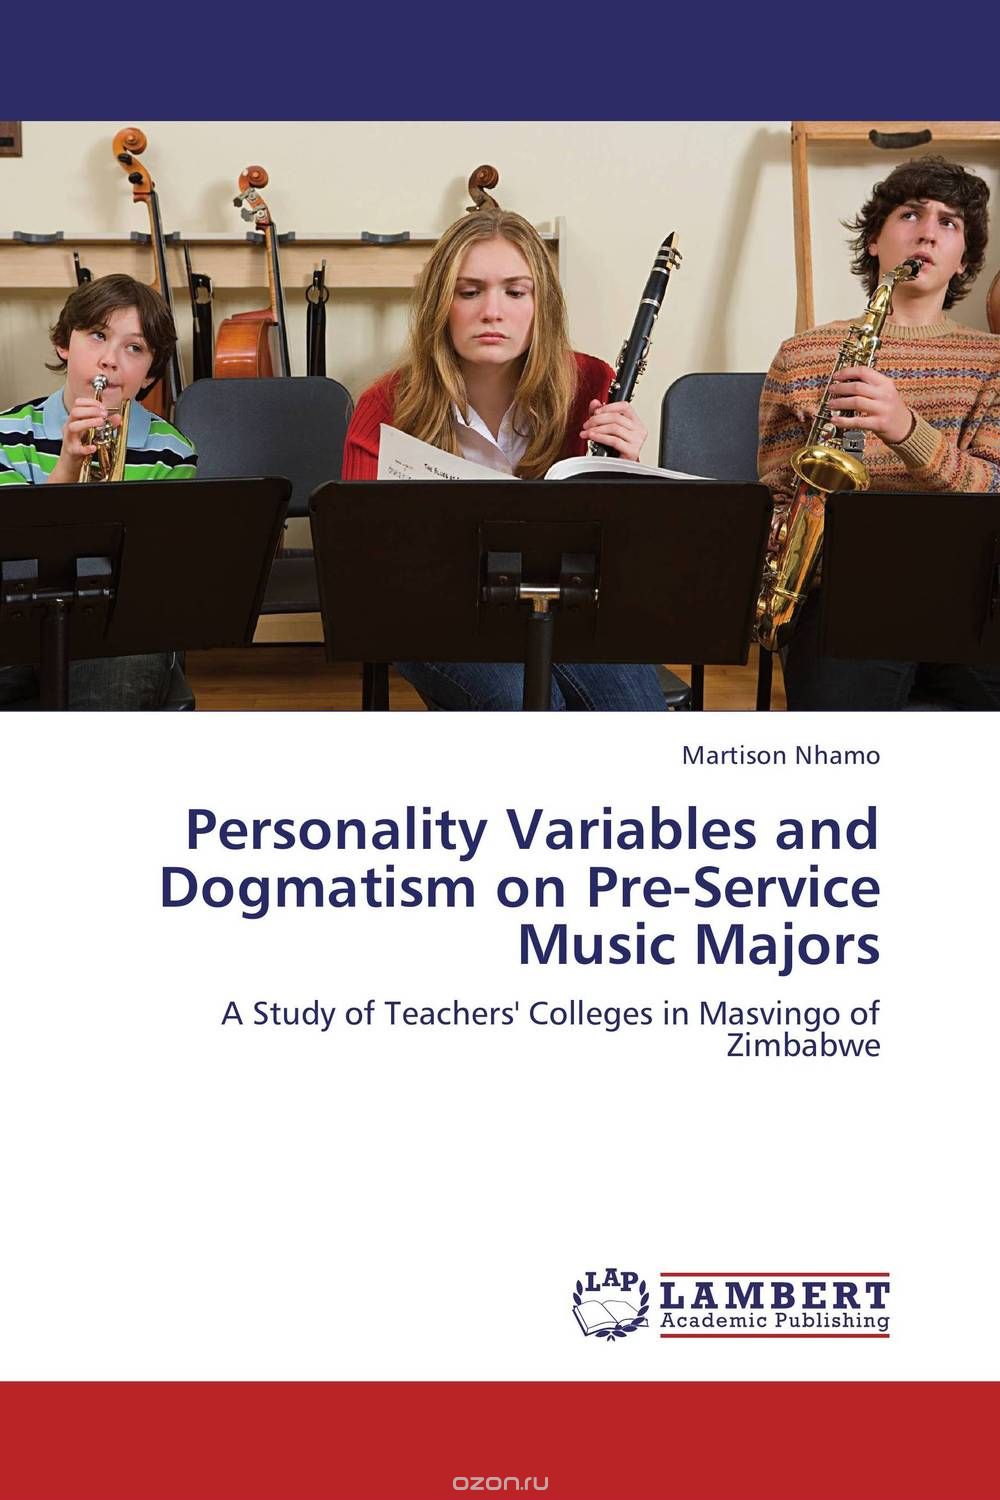 Скачать книгу "Personality Variables and Dogmatism on  Pre-Service Music Majors"